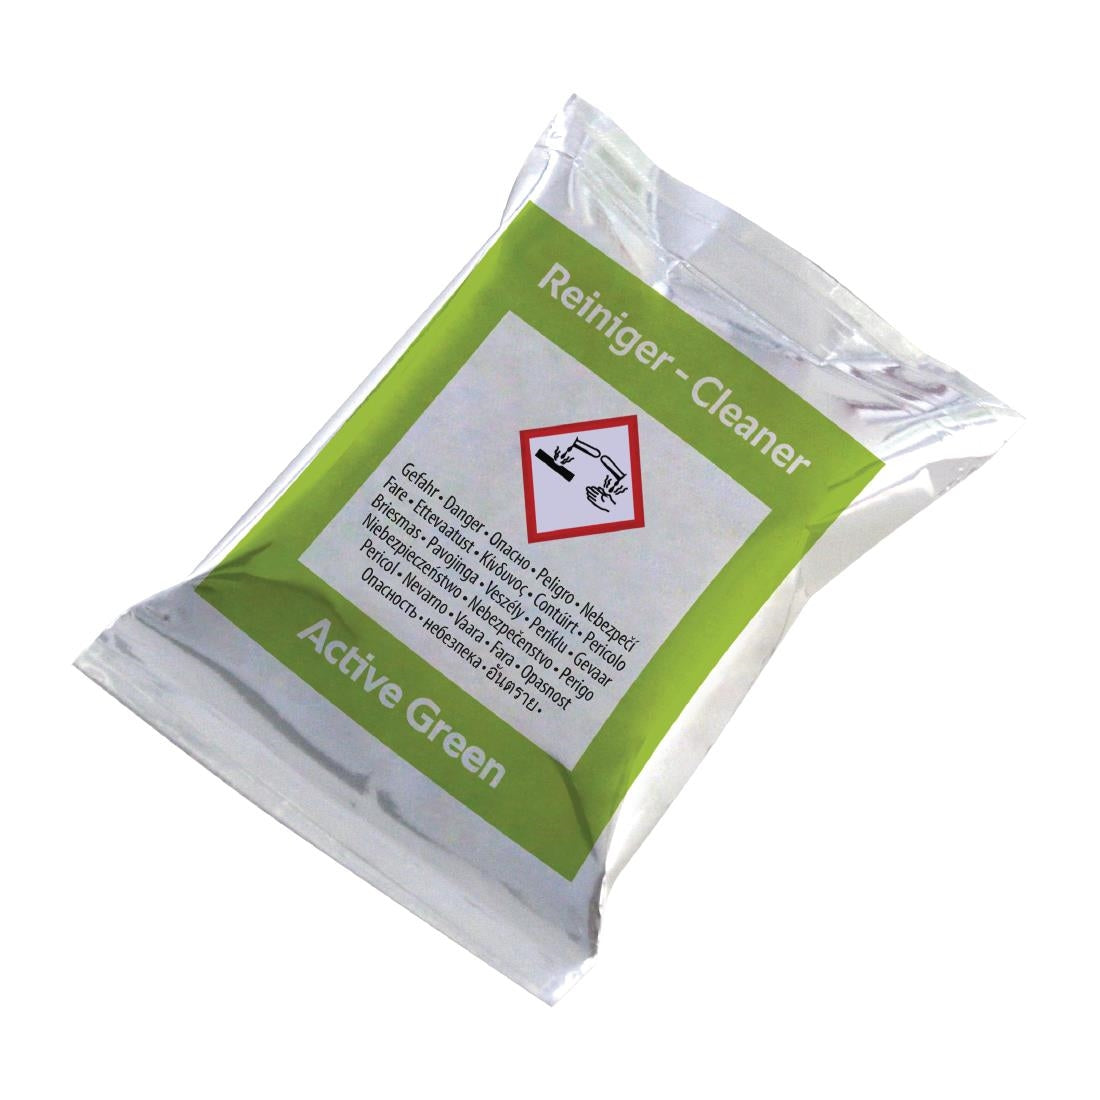 FP065 Rational Oven Cleaning Detergent Tabs Active Green (Pack of 150) 56.01.535 JD Catering Equipment Solutions Ltd